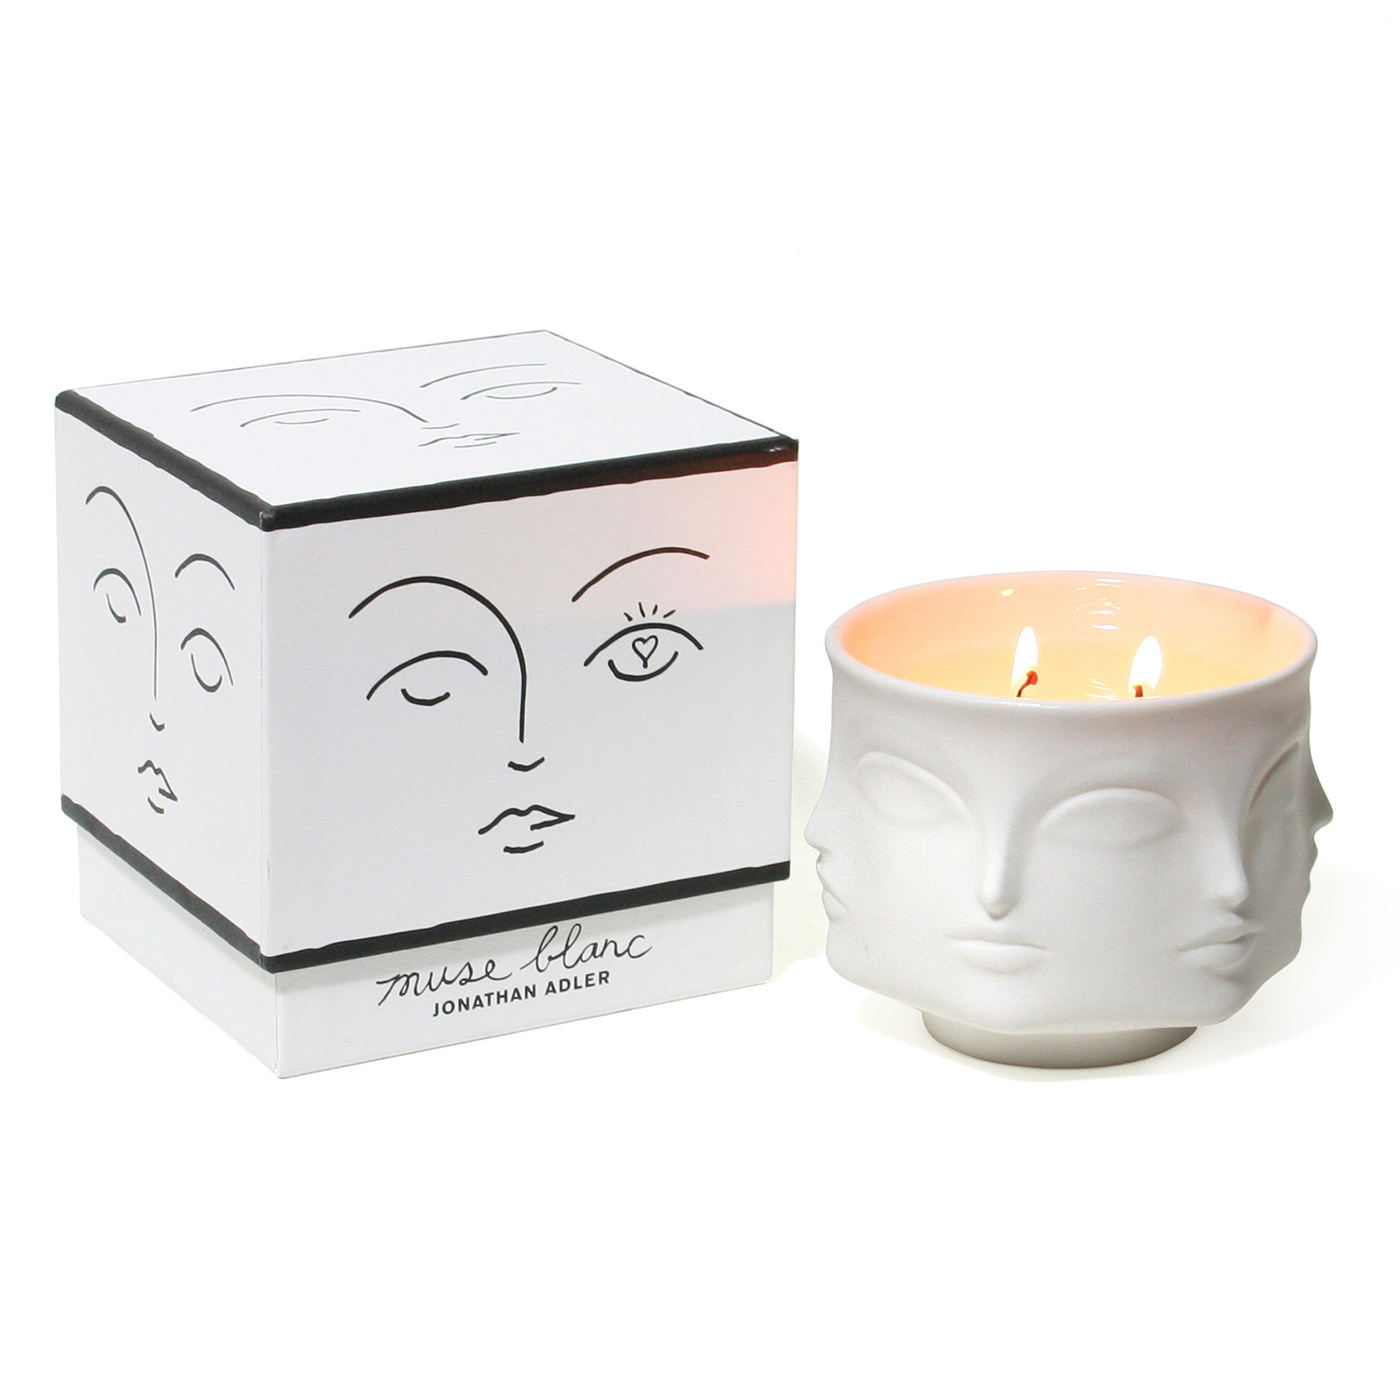 Muse Blanc Ceramic Candle | Luxury Scented Candles | Jonathan Adler